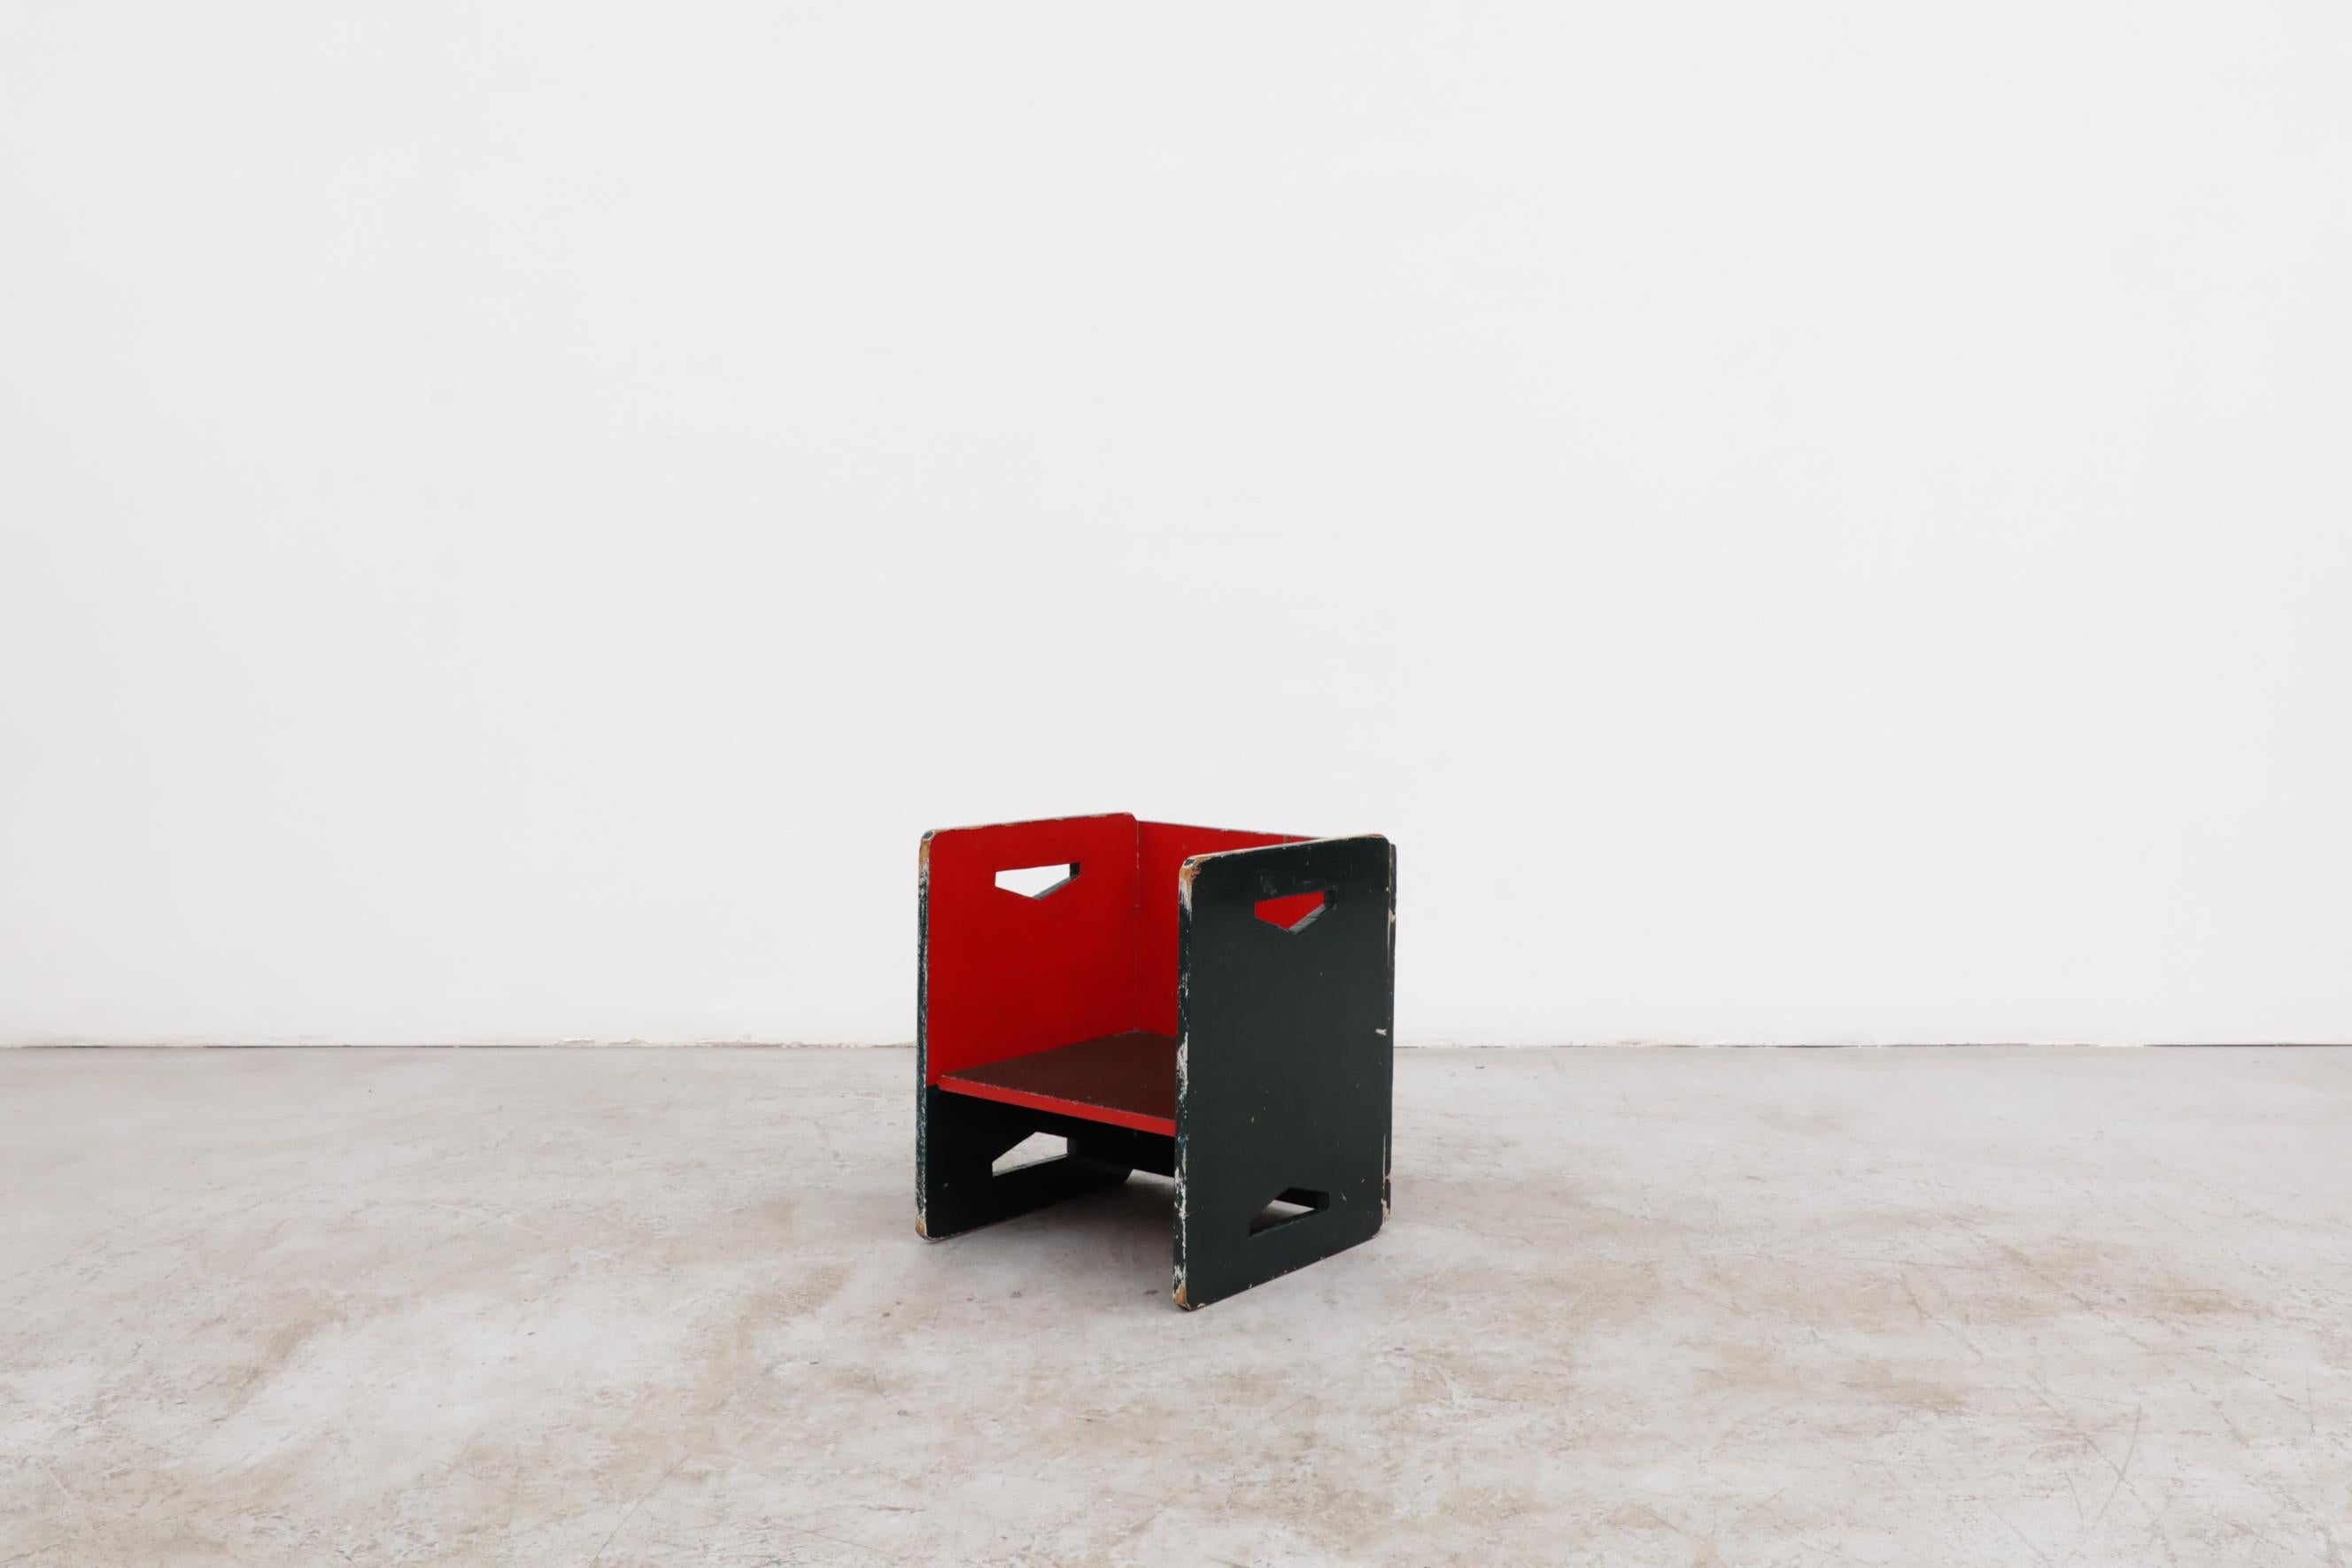 Plywood 1950's Gerrit Rietveld Inspired Red and Dark Green Children's Kubist Chair For Sale